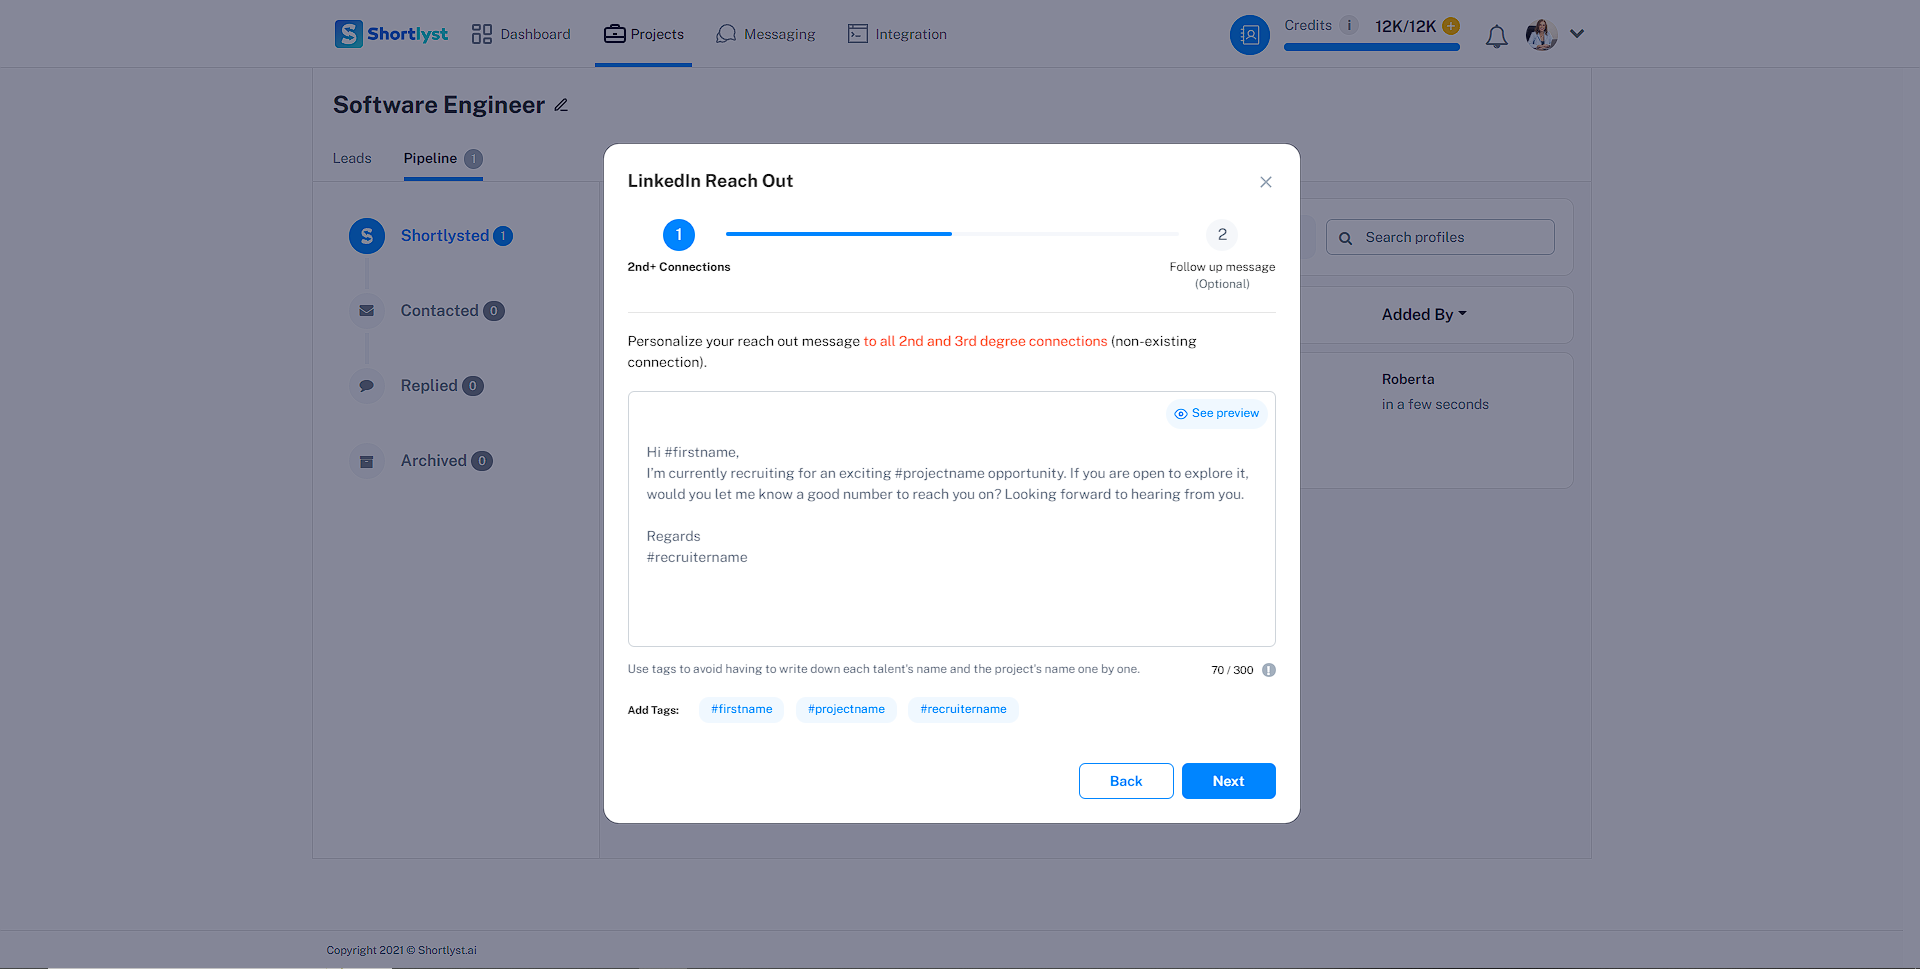 Connect with listed candidates across channels via Shortlyst. Create reach out sequences and monitor candidate responses to increase your conversion rates. Minimize duplication of recruitment efforts across the team with collaboration functionalities